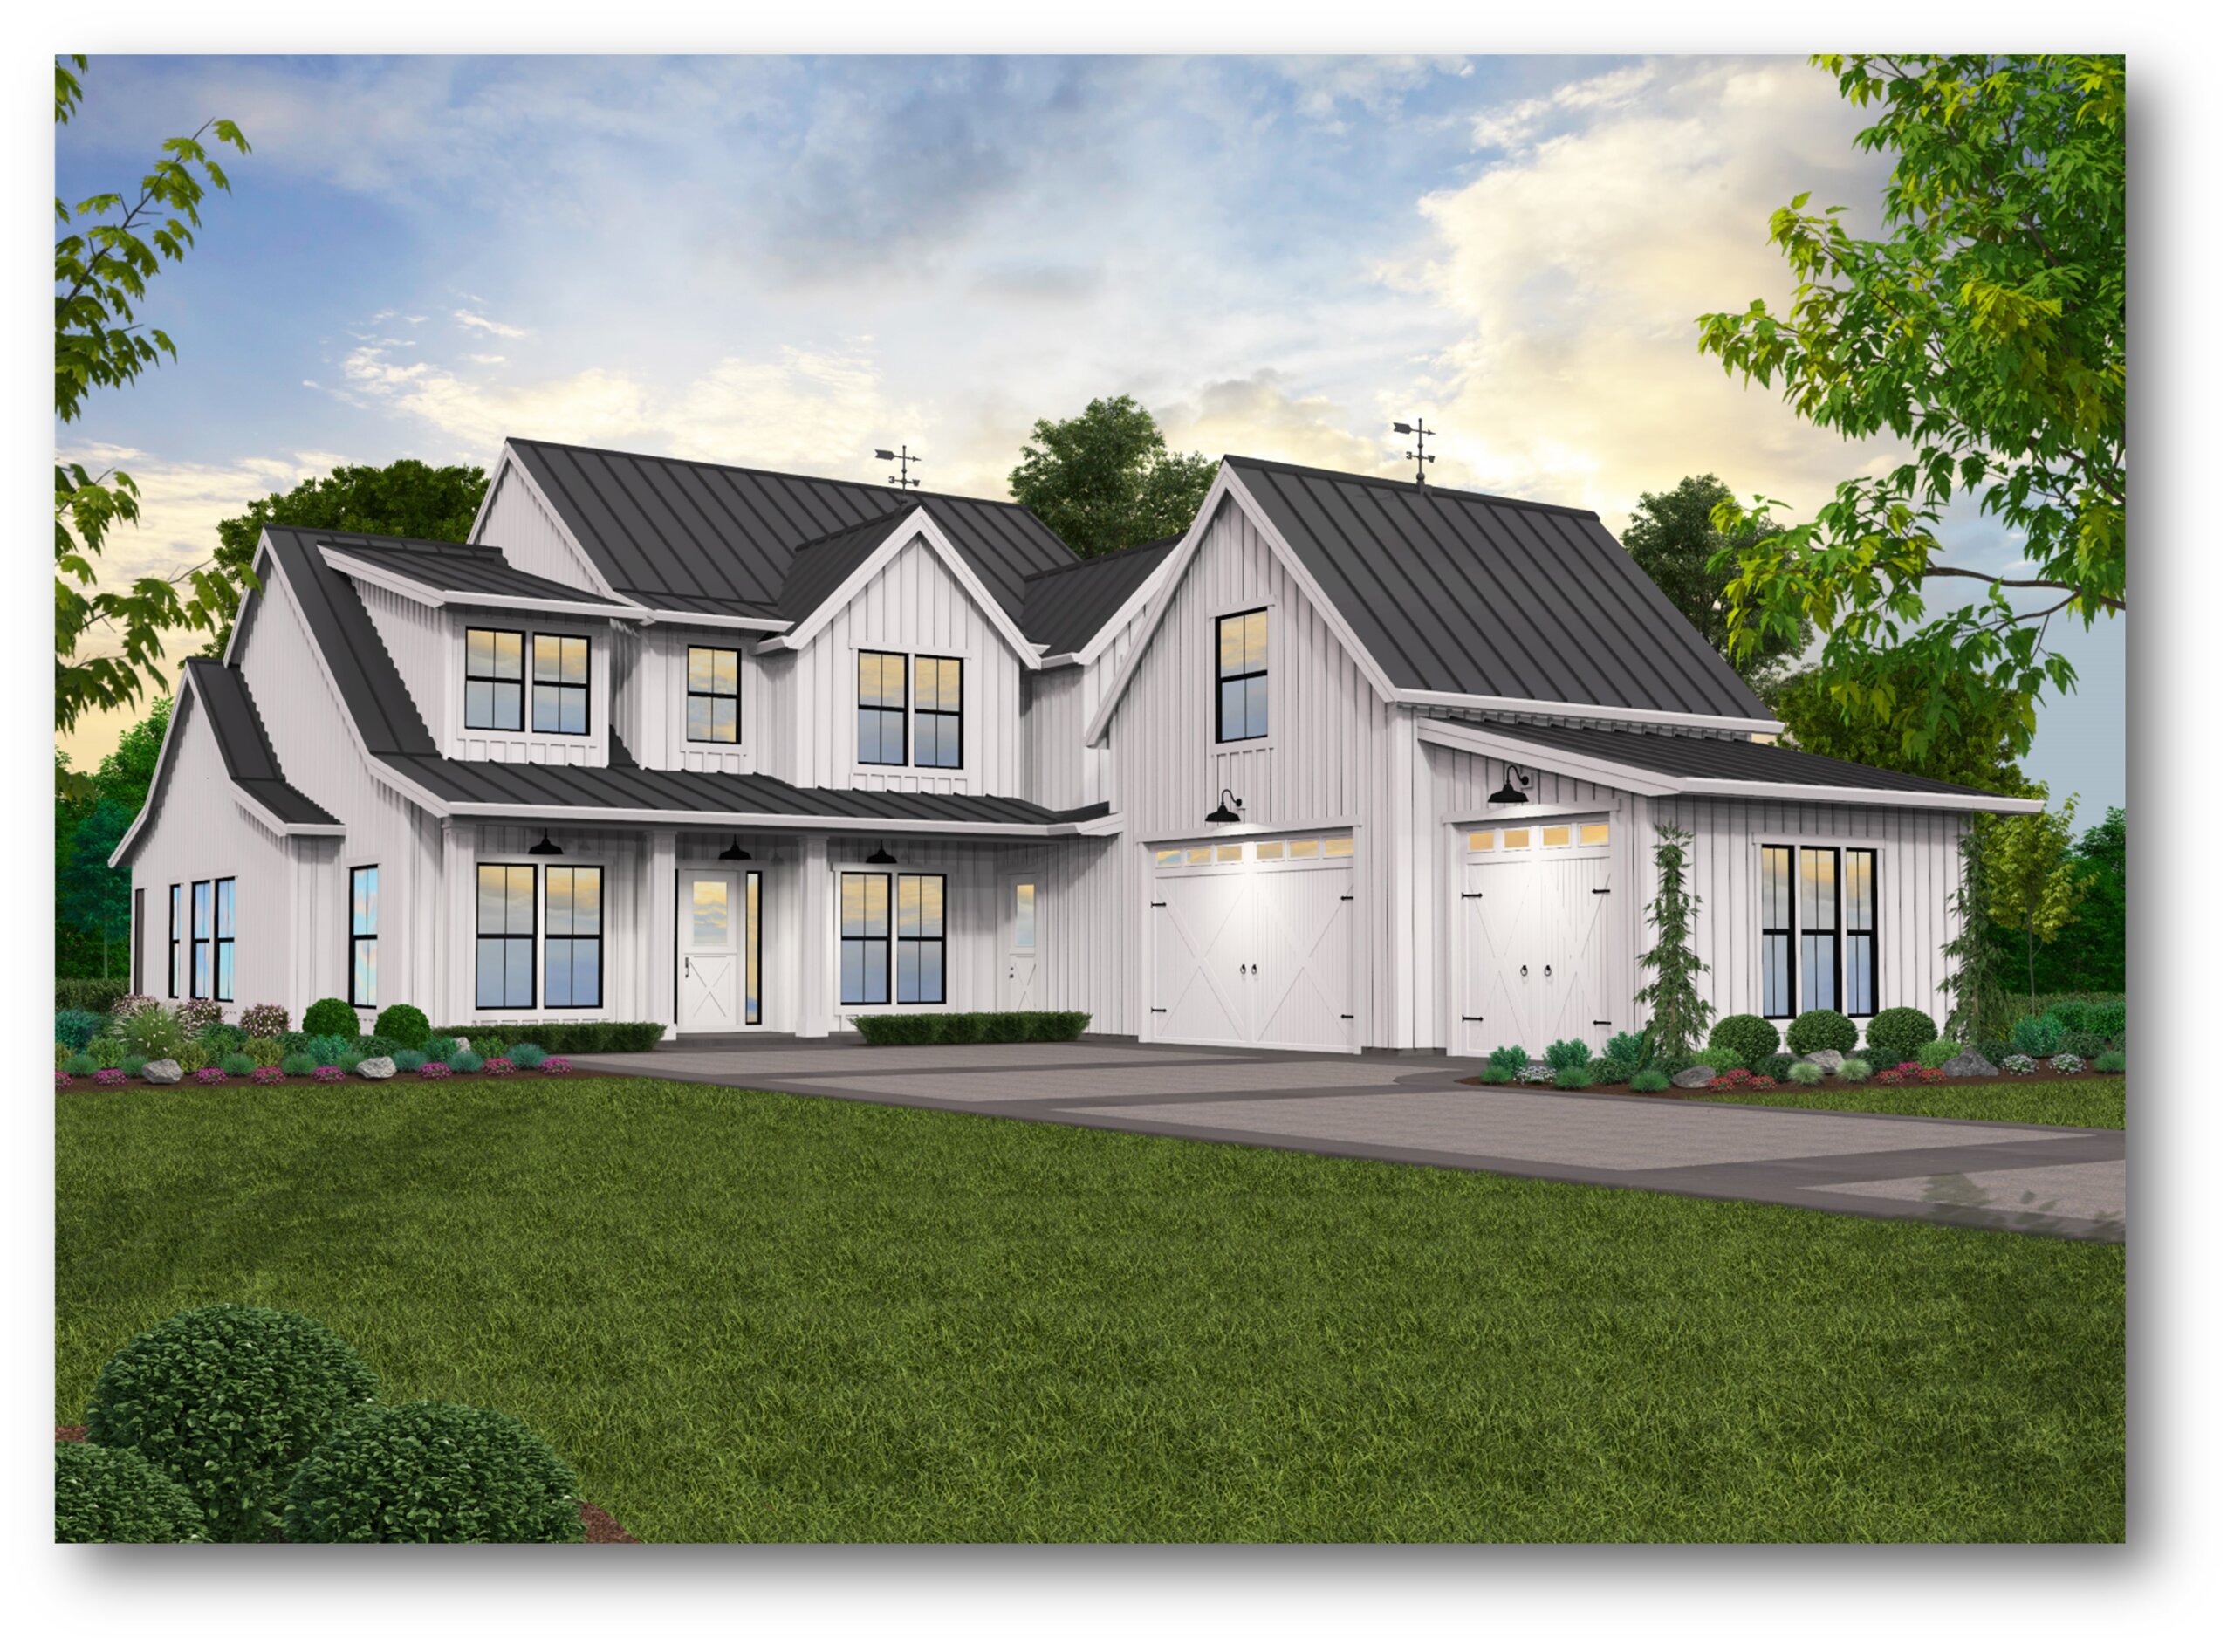 RUSTIC MODERN FARM HOUSE PLAN MF 3387 GRAND JUNCTION FRONT VIEW Scaled 